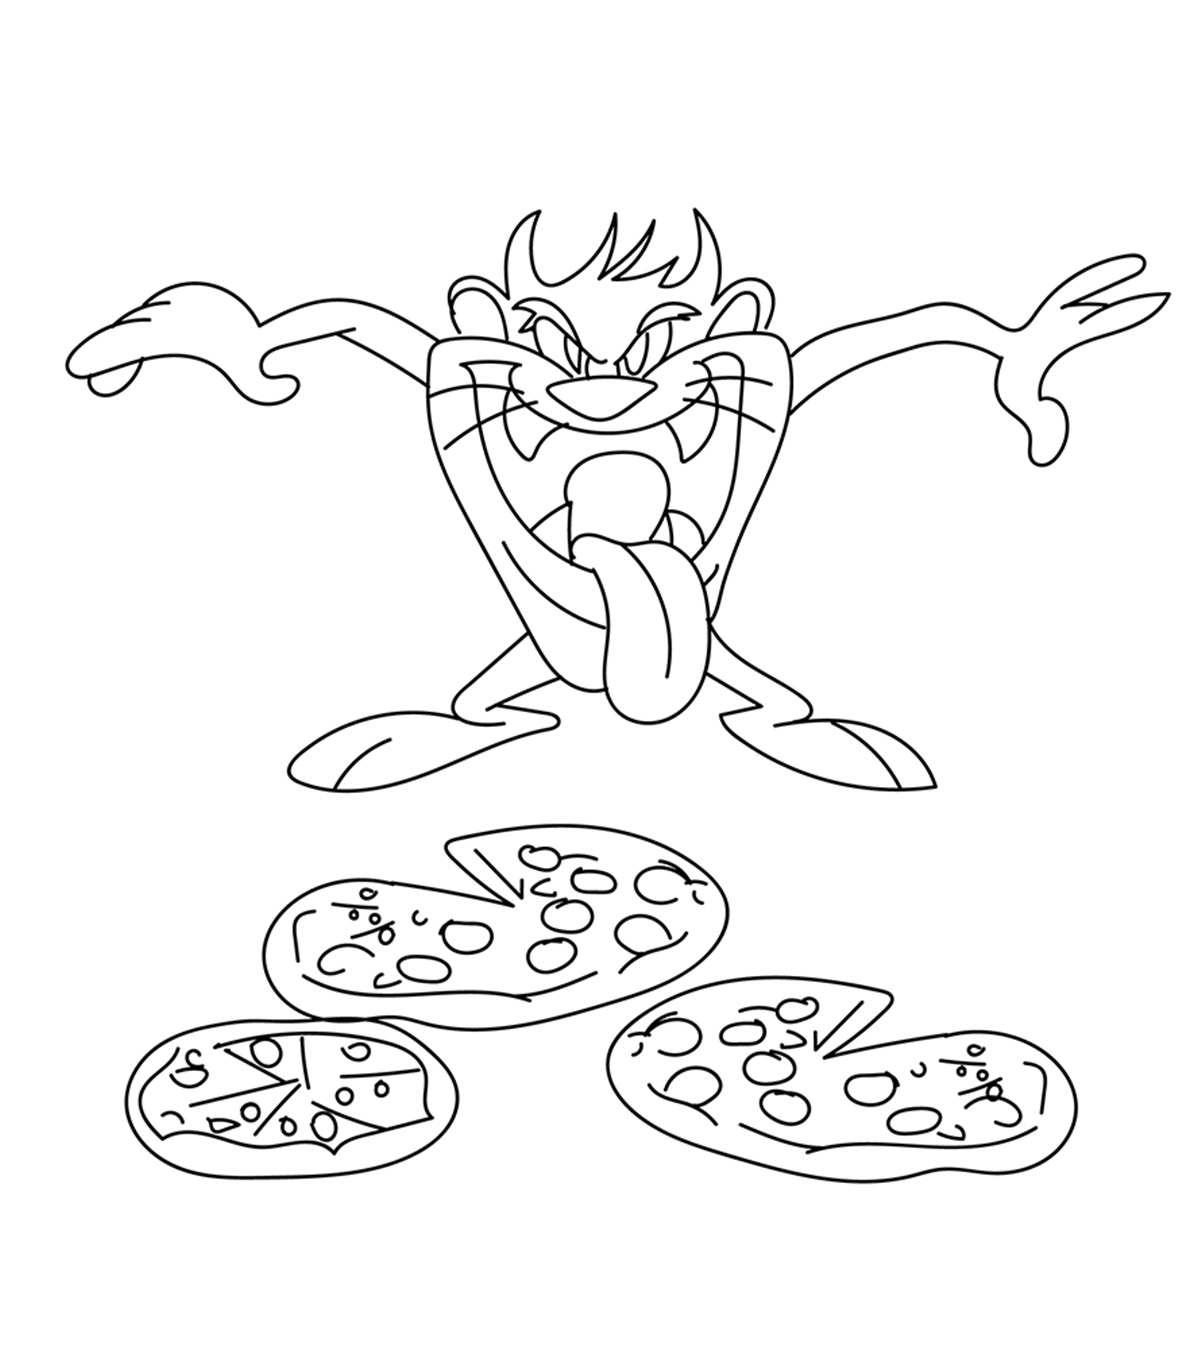 10 Best Pizza Coloring Pages For Your Toddler_image